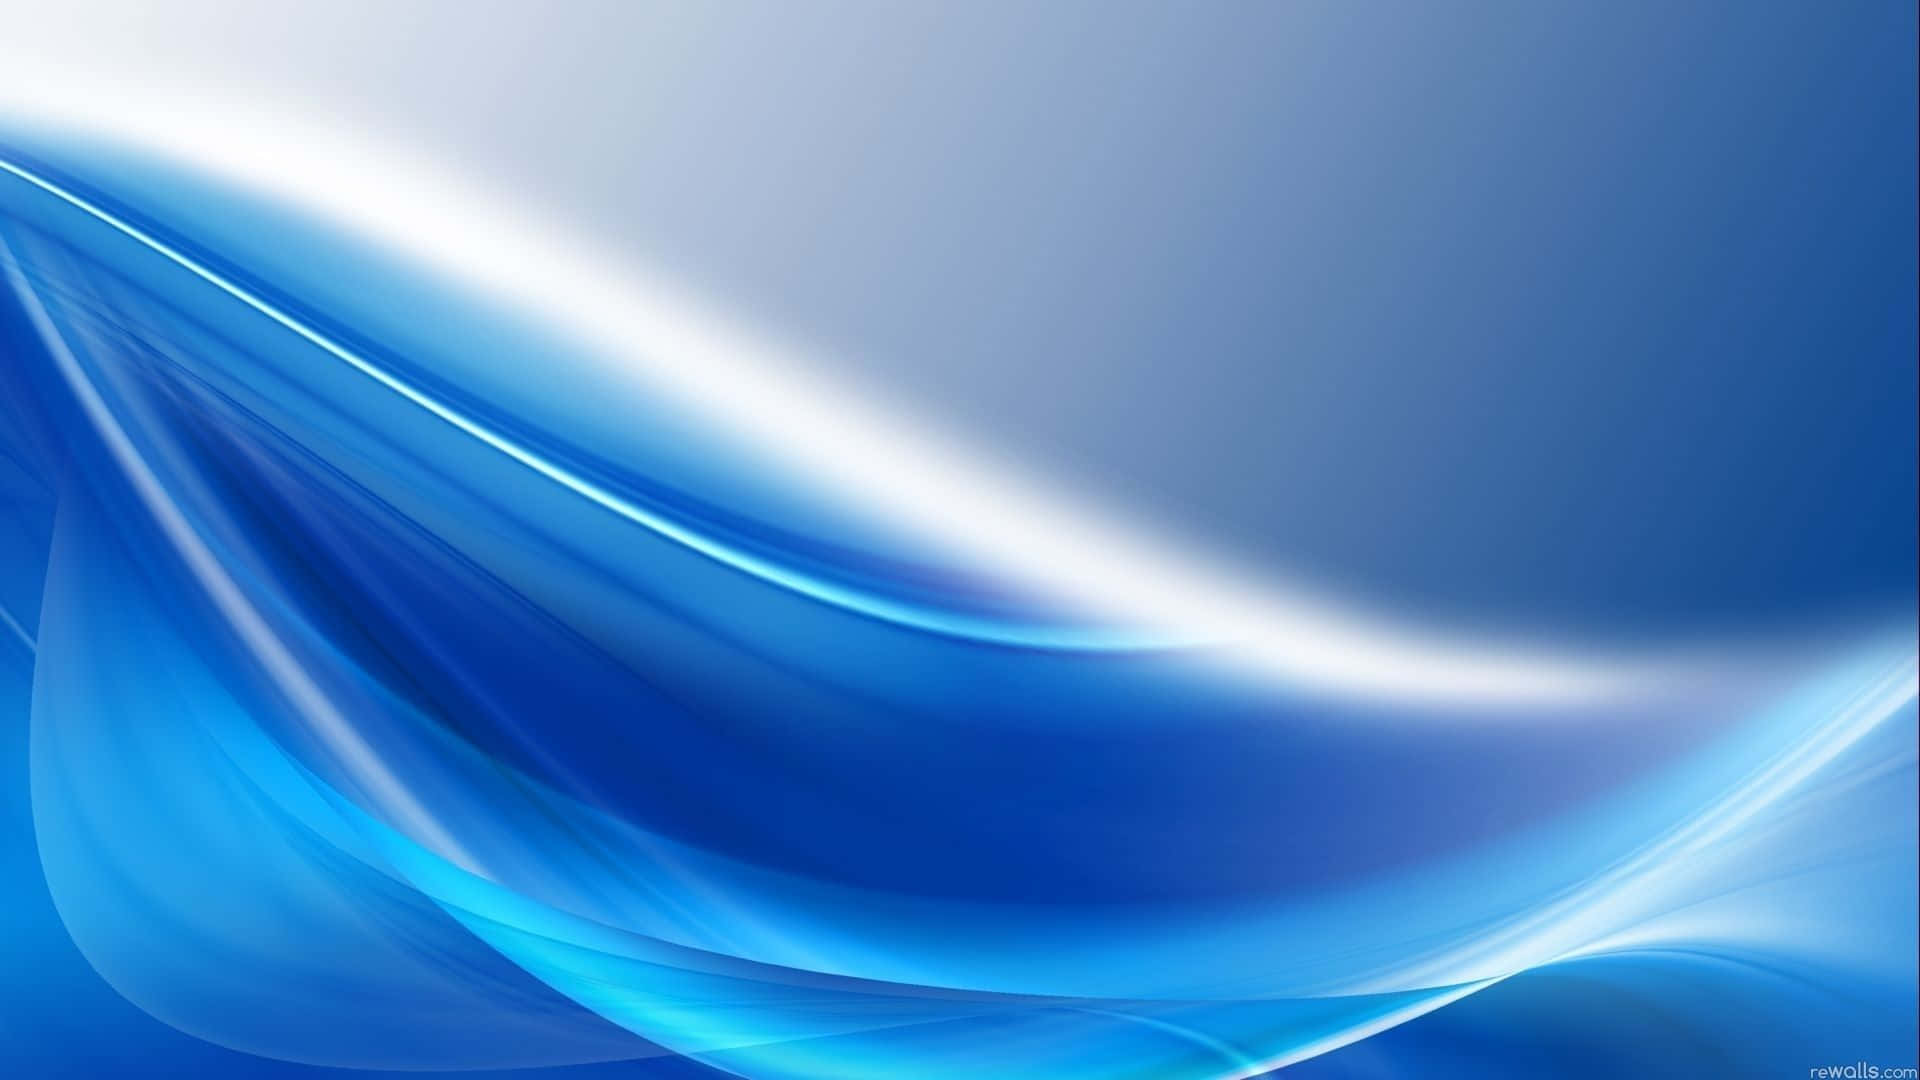 Blue And Silver Flowy Wallpaper